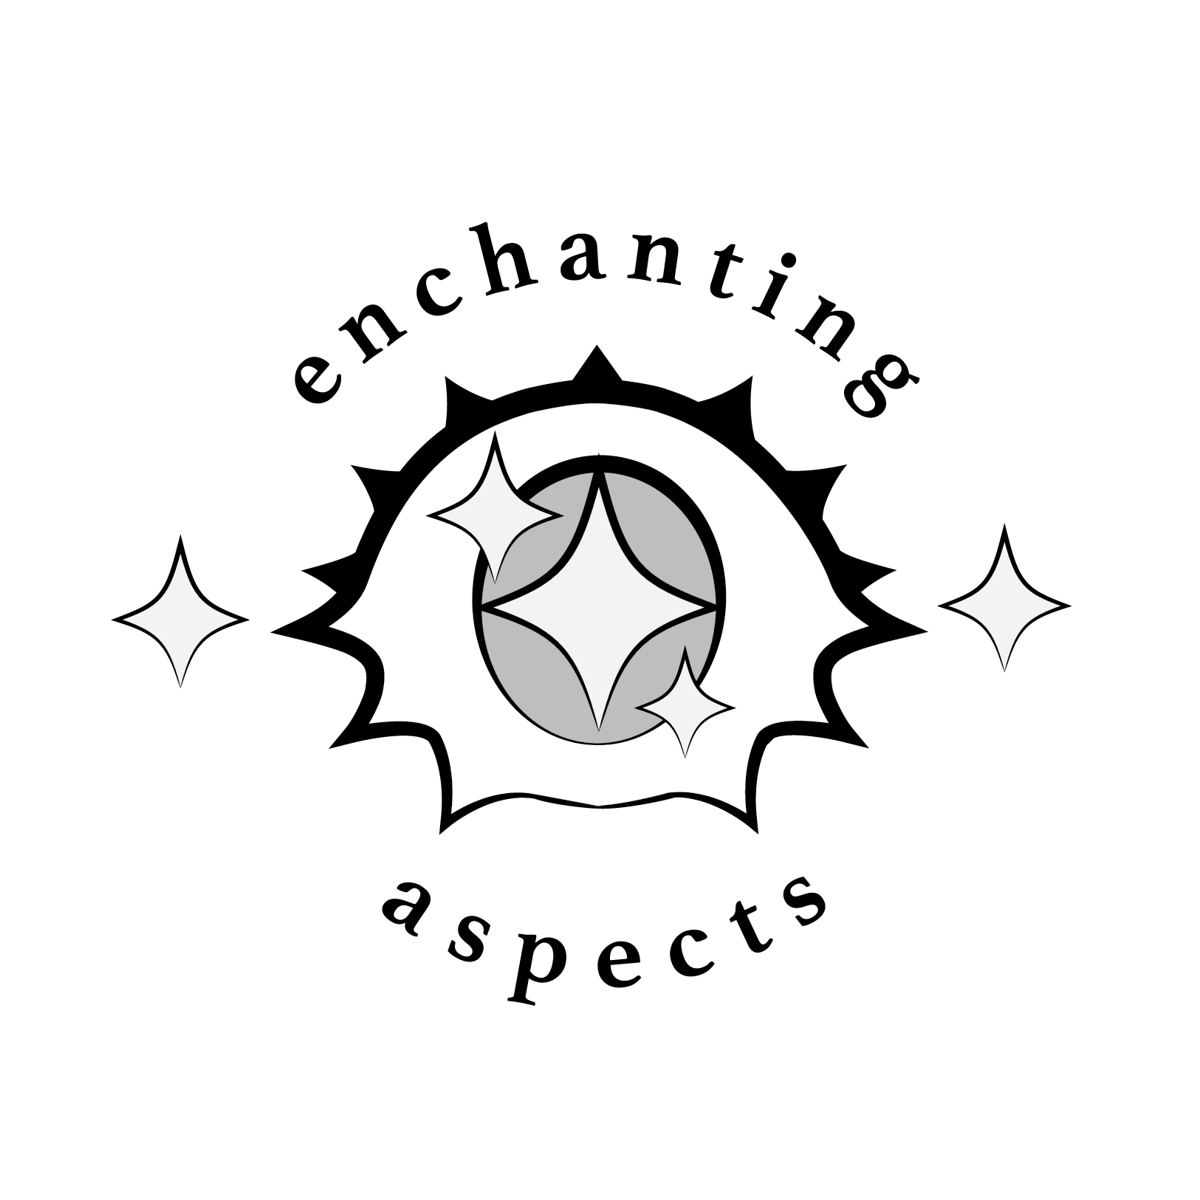 Enchanting Aspects cover art. A cute stylized eye looking directly at the viewer with sparkles surrounding it, indicated keen and excited interest.